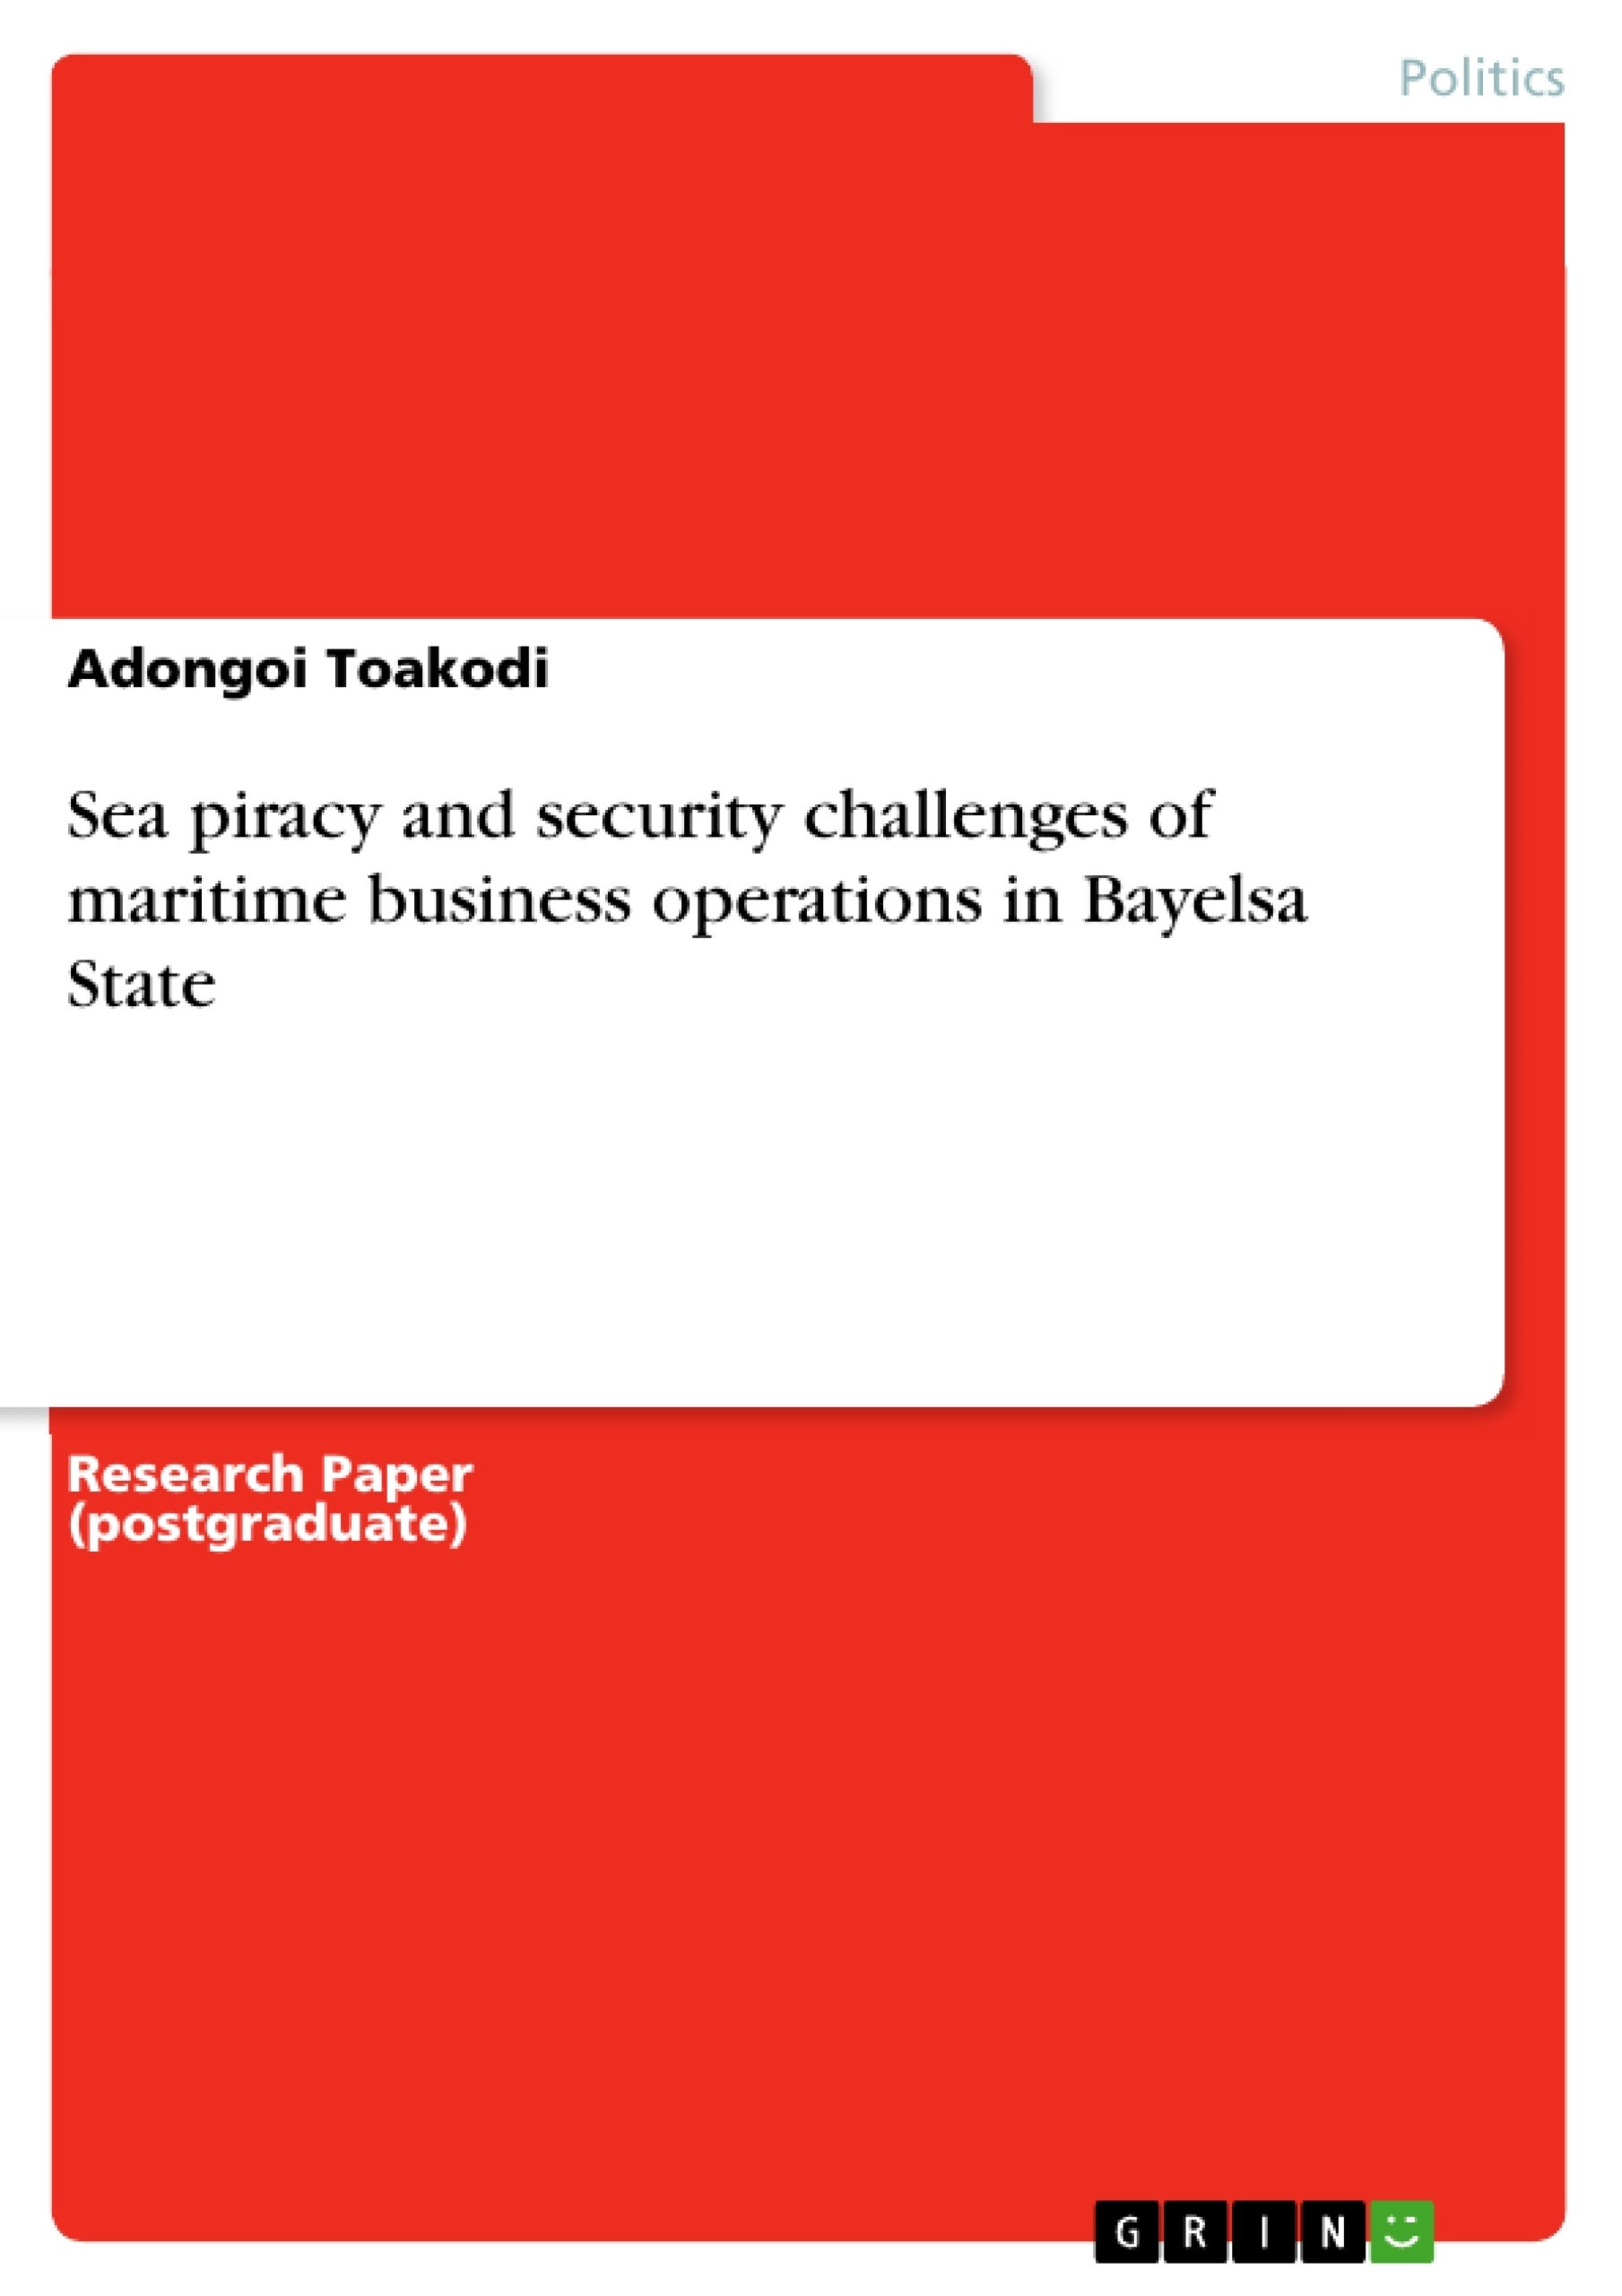 Titre: Sea piracy and security challenges of maritime business operations in Bayelsa State